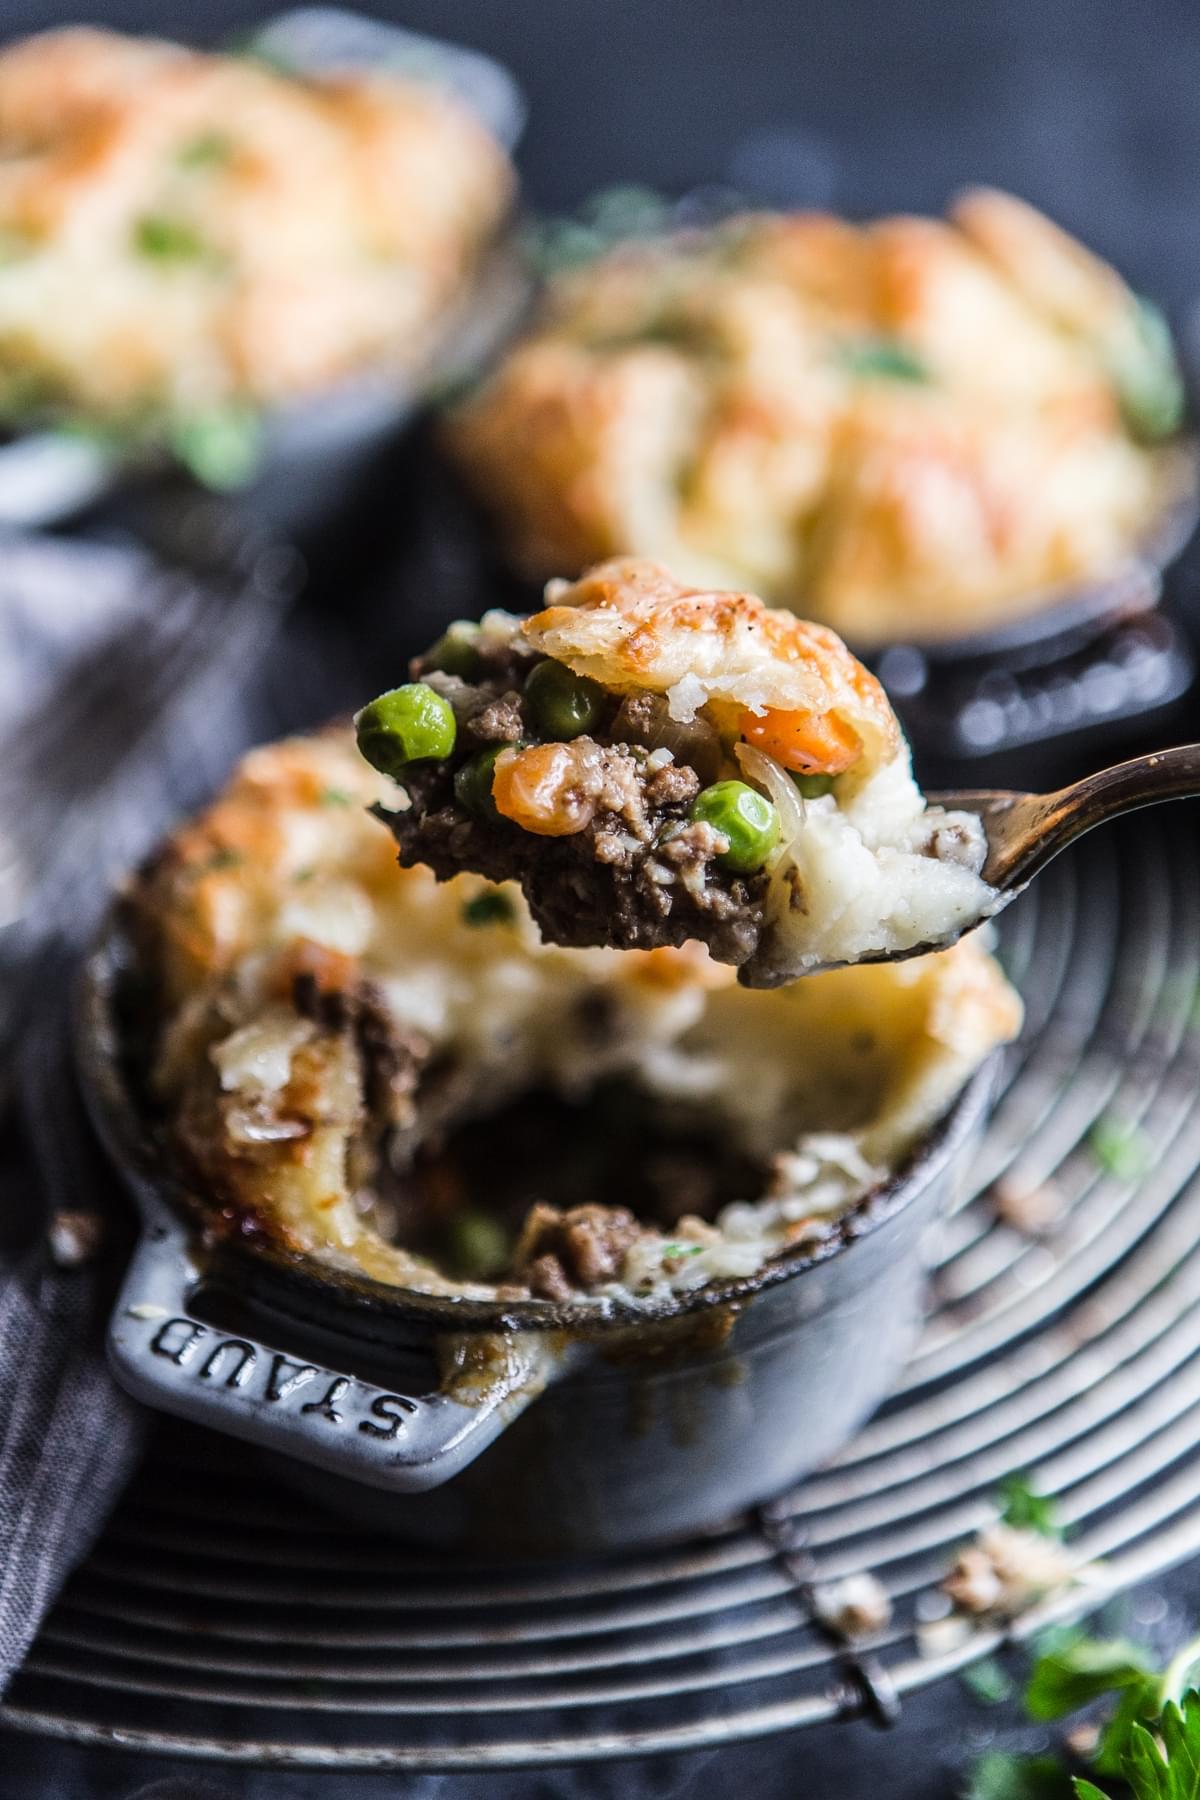 cocettes with llamb shepherd's pie with puff pastry and mashed potatoes sprinkled with gruyere cheese  with parsley on a fork